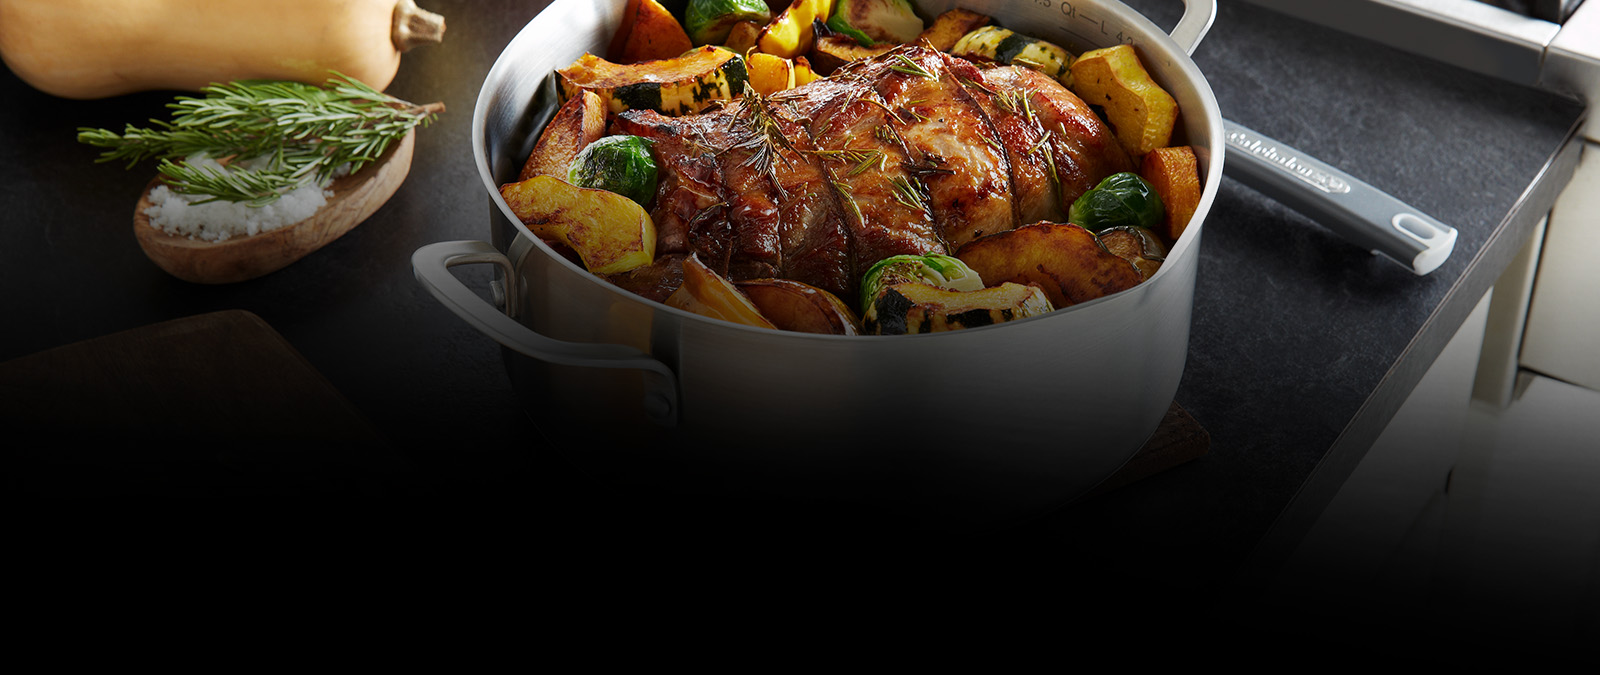 Signature Multifunction Roaster with Sheet Pan Lid